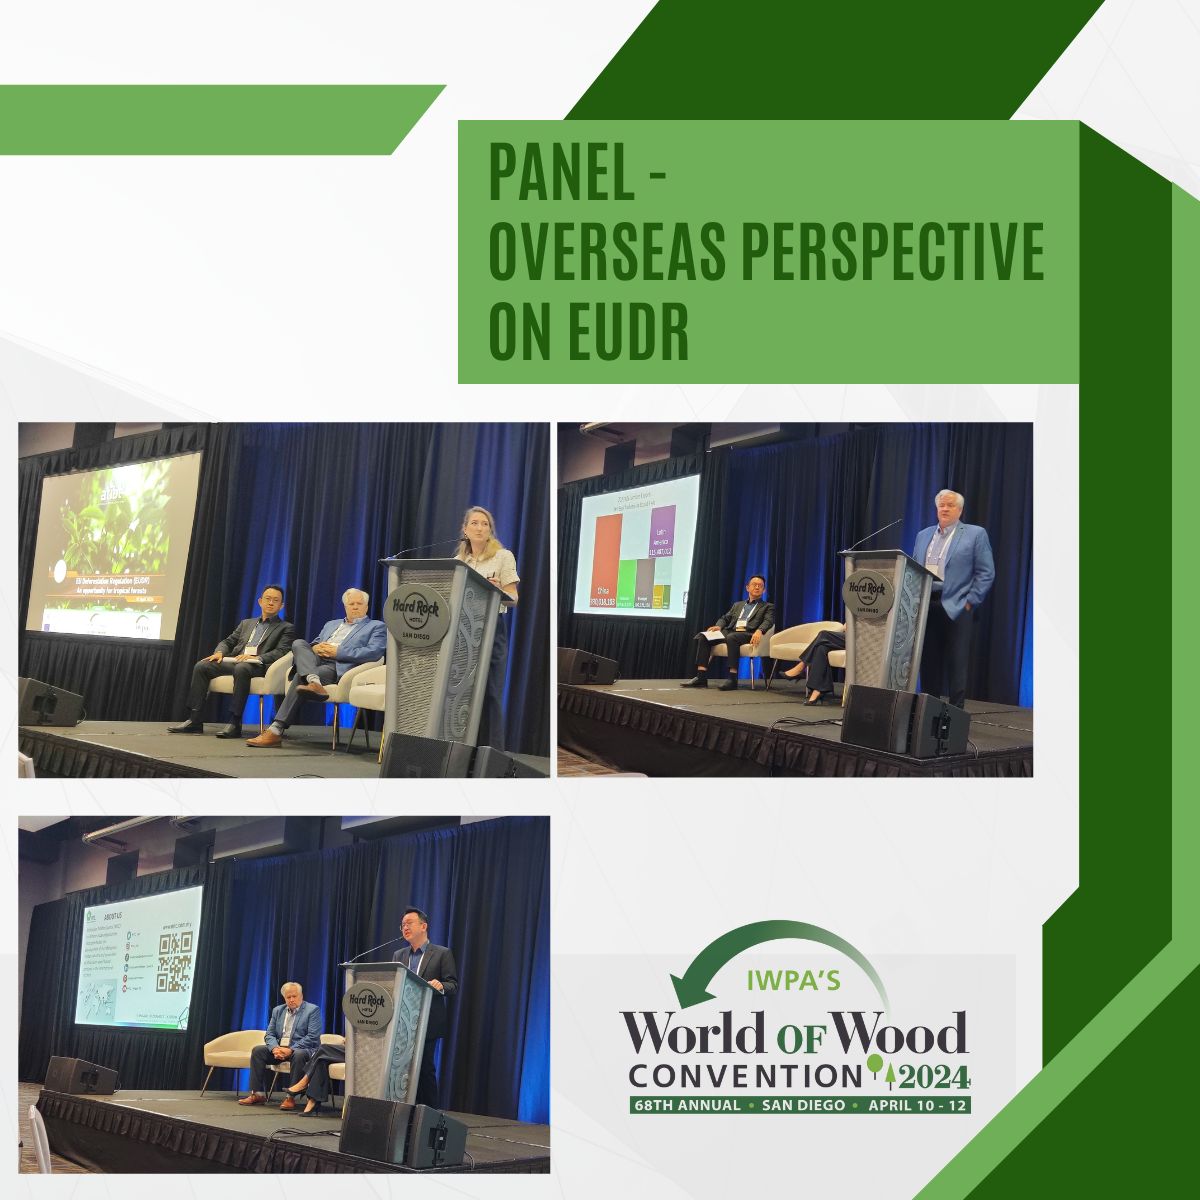 Yesterday was jam packed. We'll be sharing in coming days. Thursday's sessions included a panel on the overseas perspectives on EUDR. Special thanks to Ting Wai Tan at the Malaysian Timber Council, Caroline Duhesme from ATIBT, and Michael Snow American Hardwood Export Council.